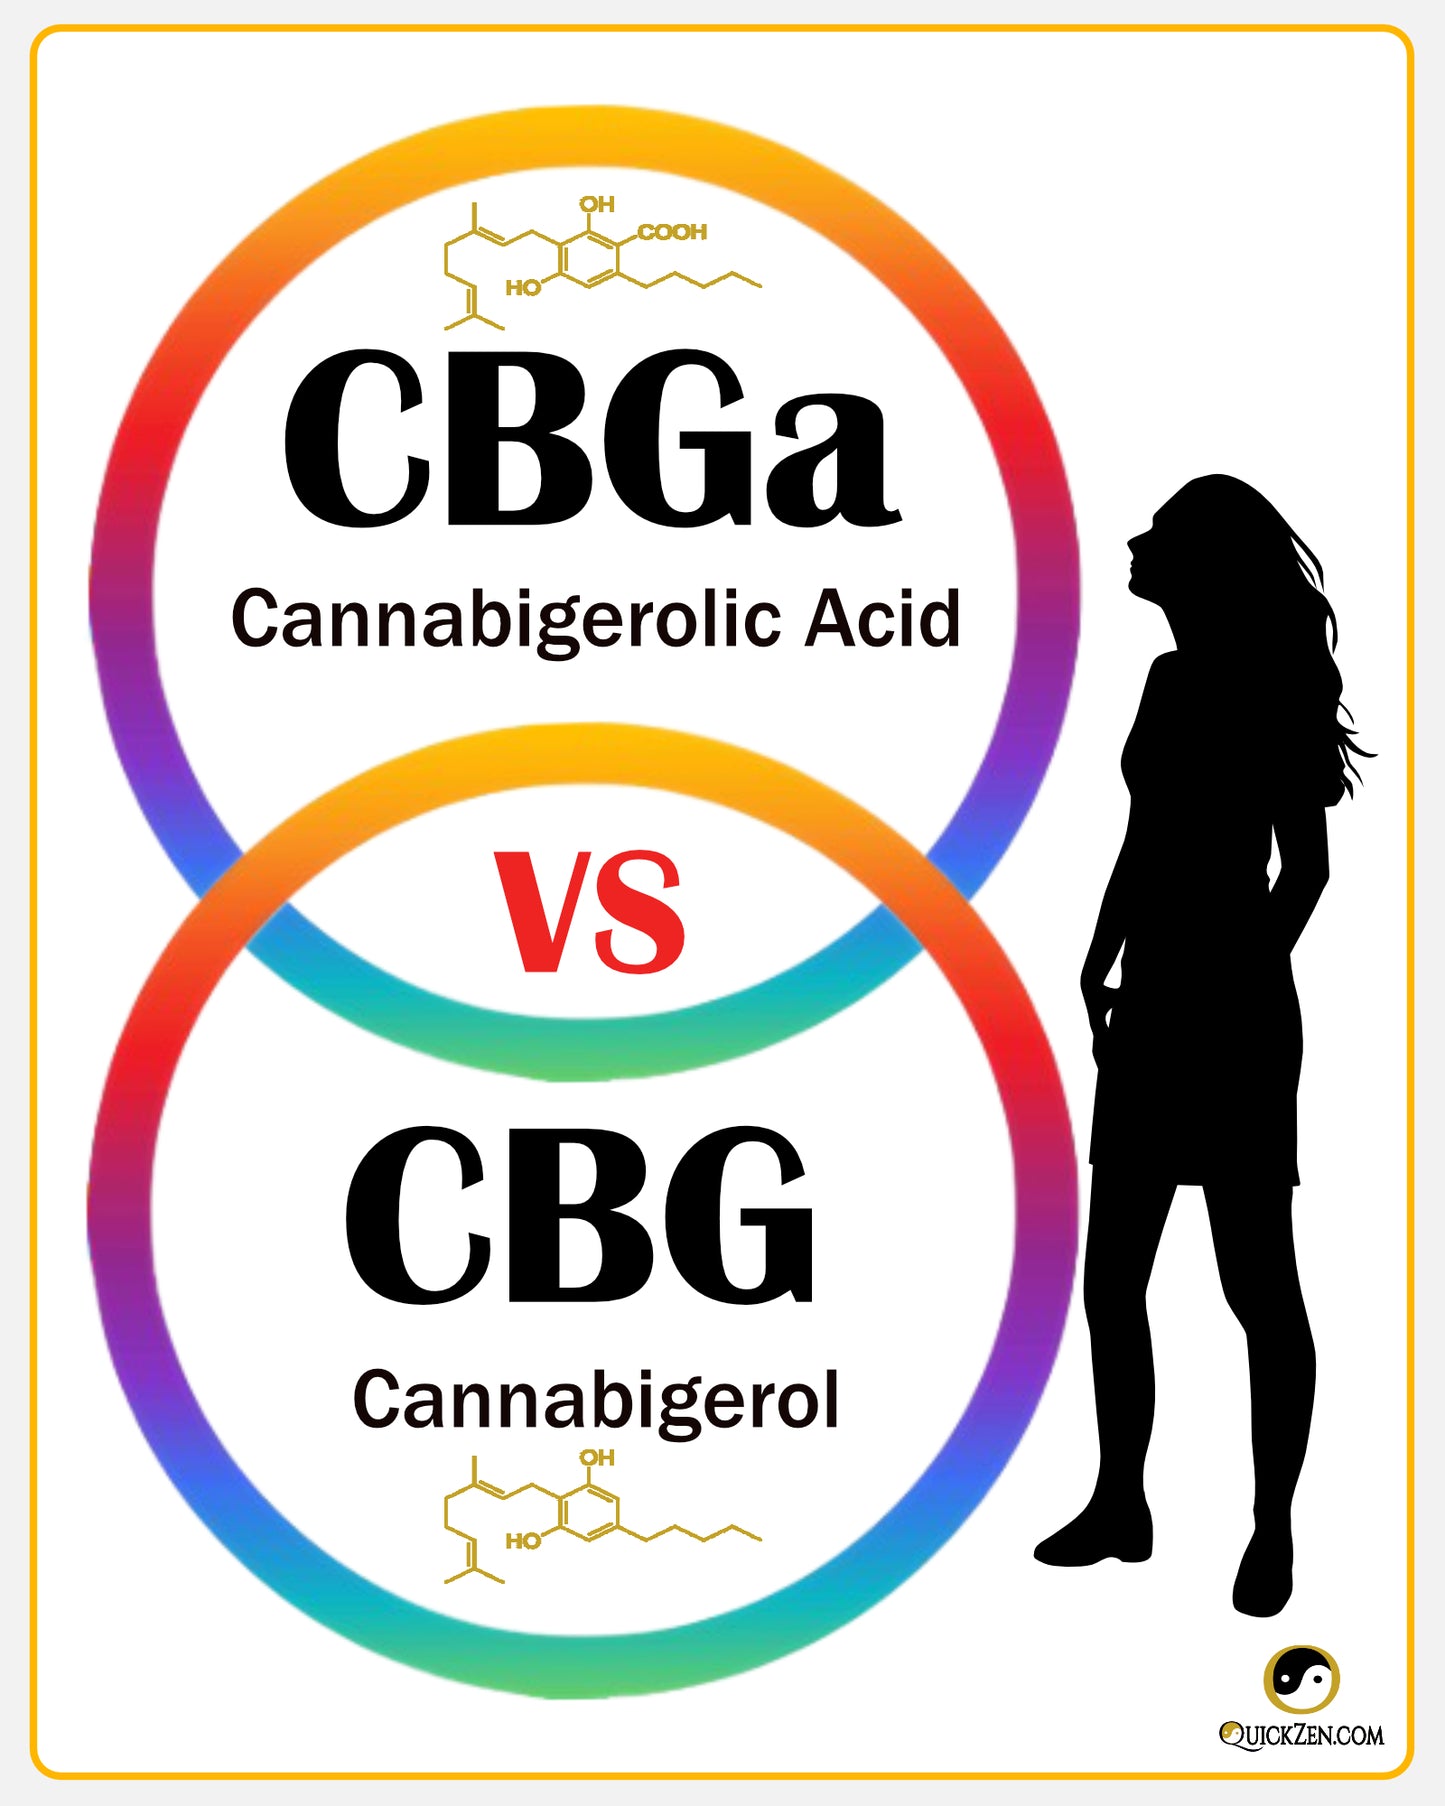 CBG vs CBGa. What is the difference? Both have potential benefits. Science is learning more every day.